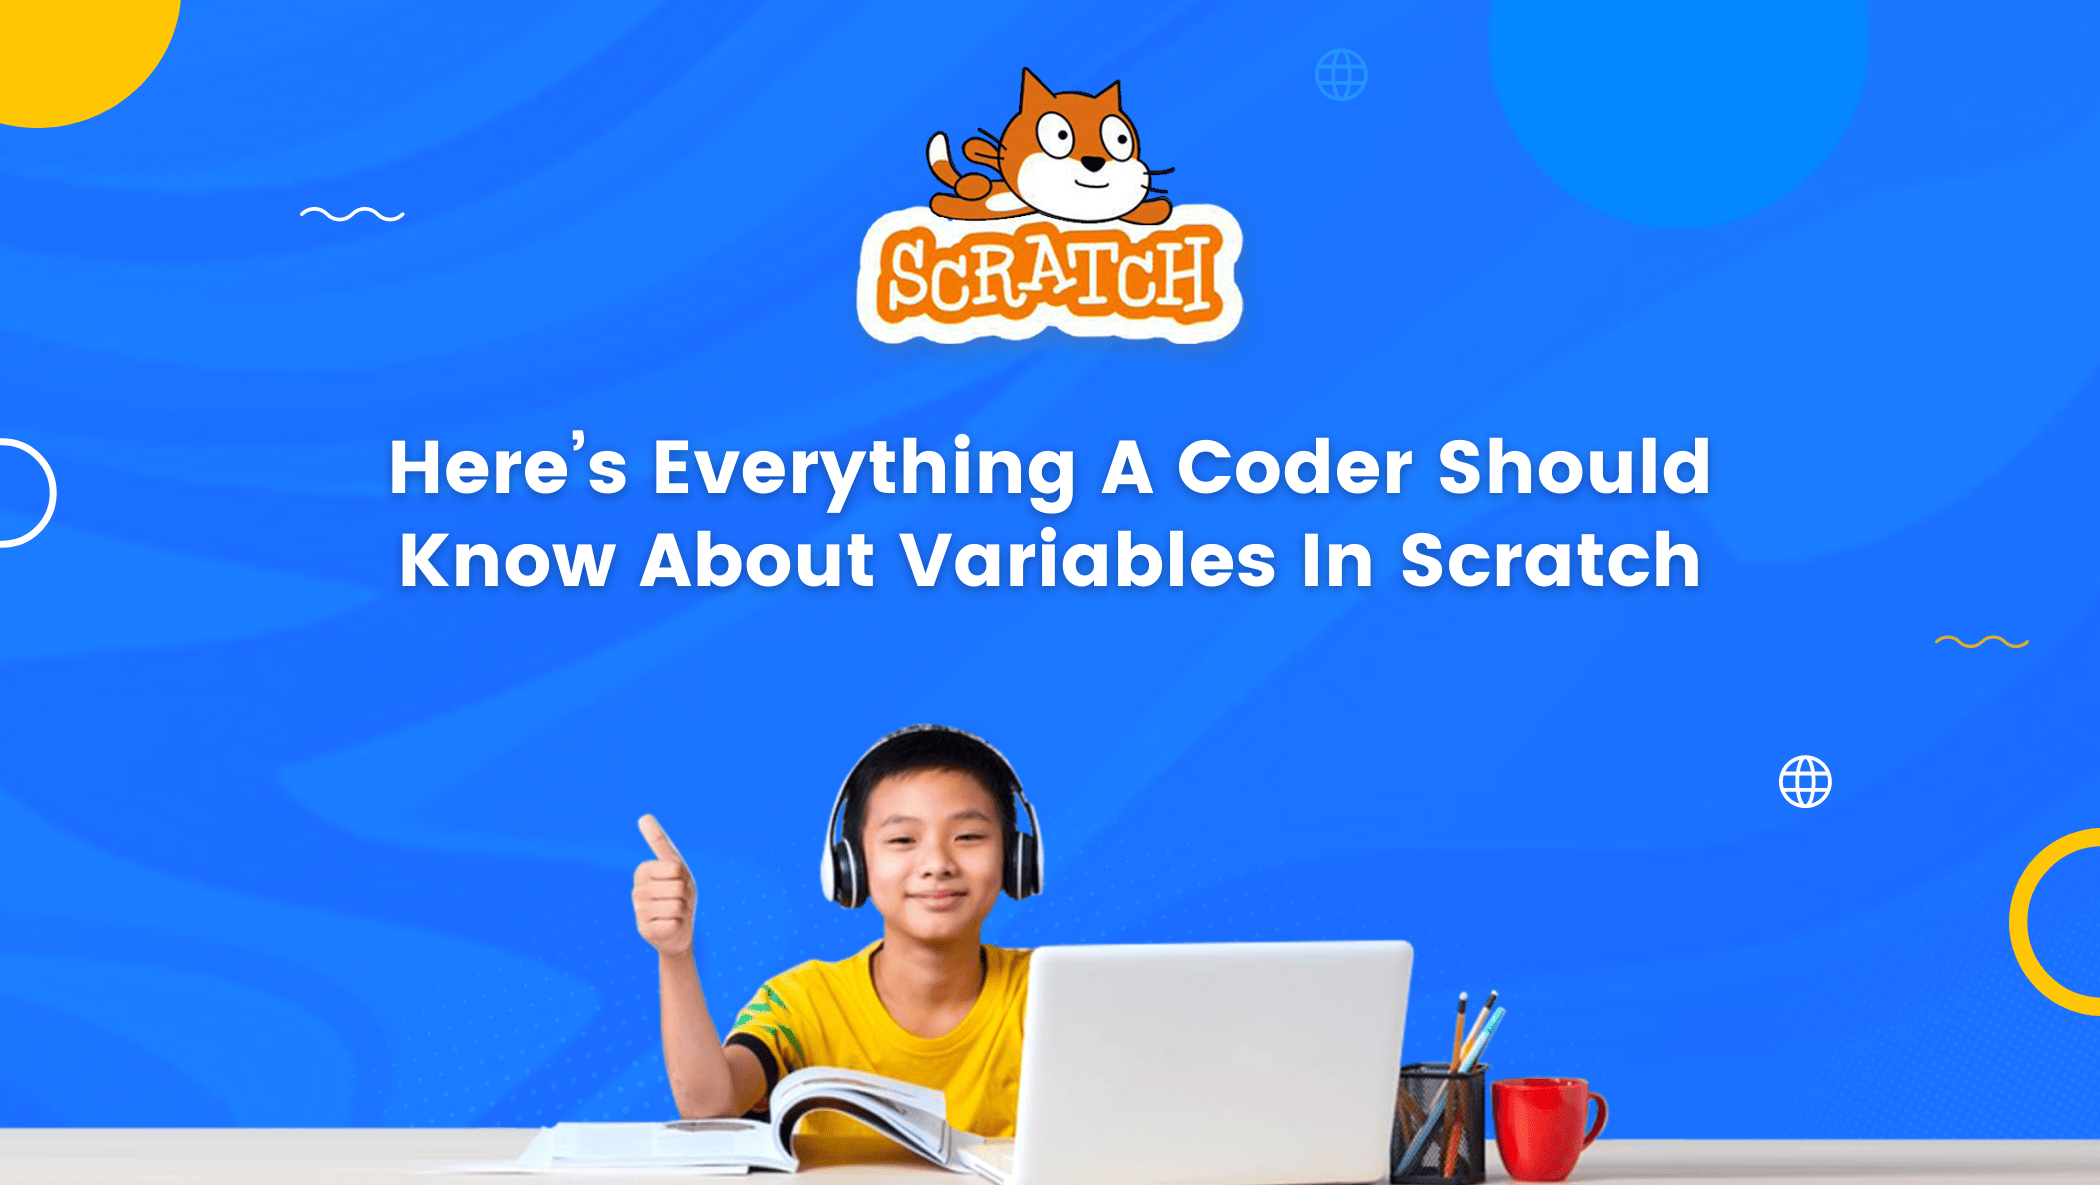 Here’s Everything A Coder Should Know About Variables